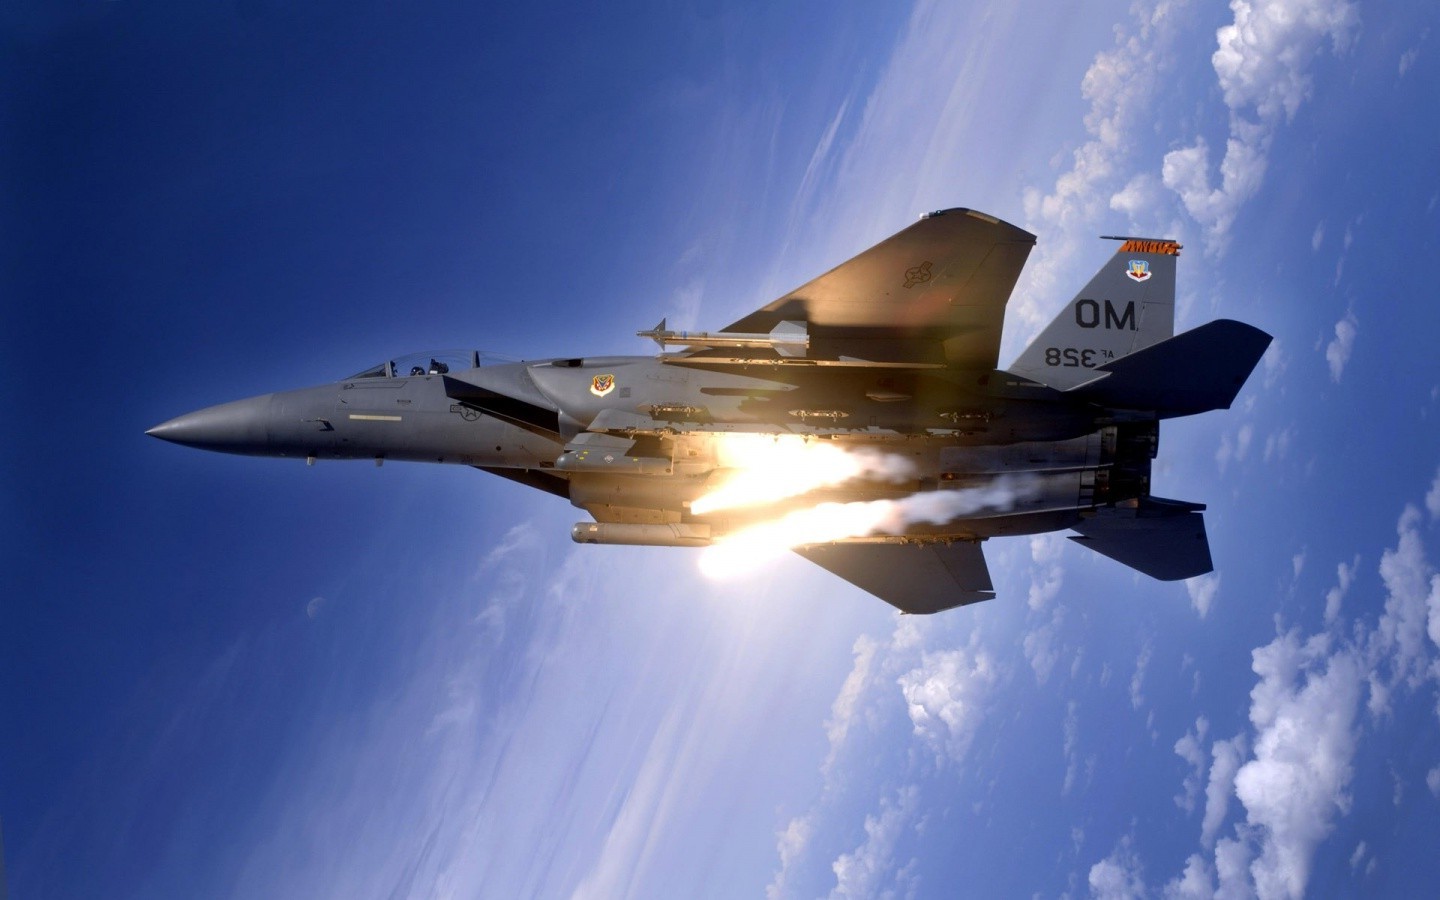 war, Missiles, Airplane, Blue, Clouds, Clear sky, Flares, F 15 Eagle, F 15, Military Wallpaper